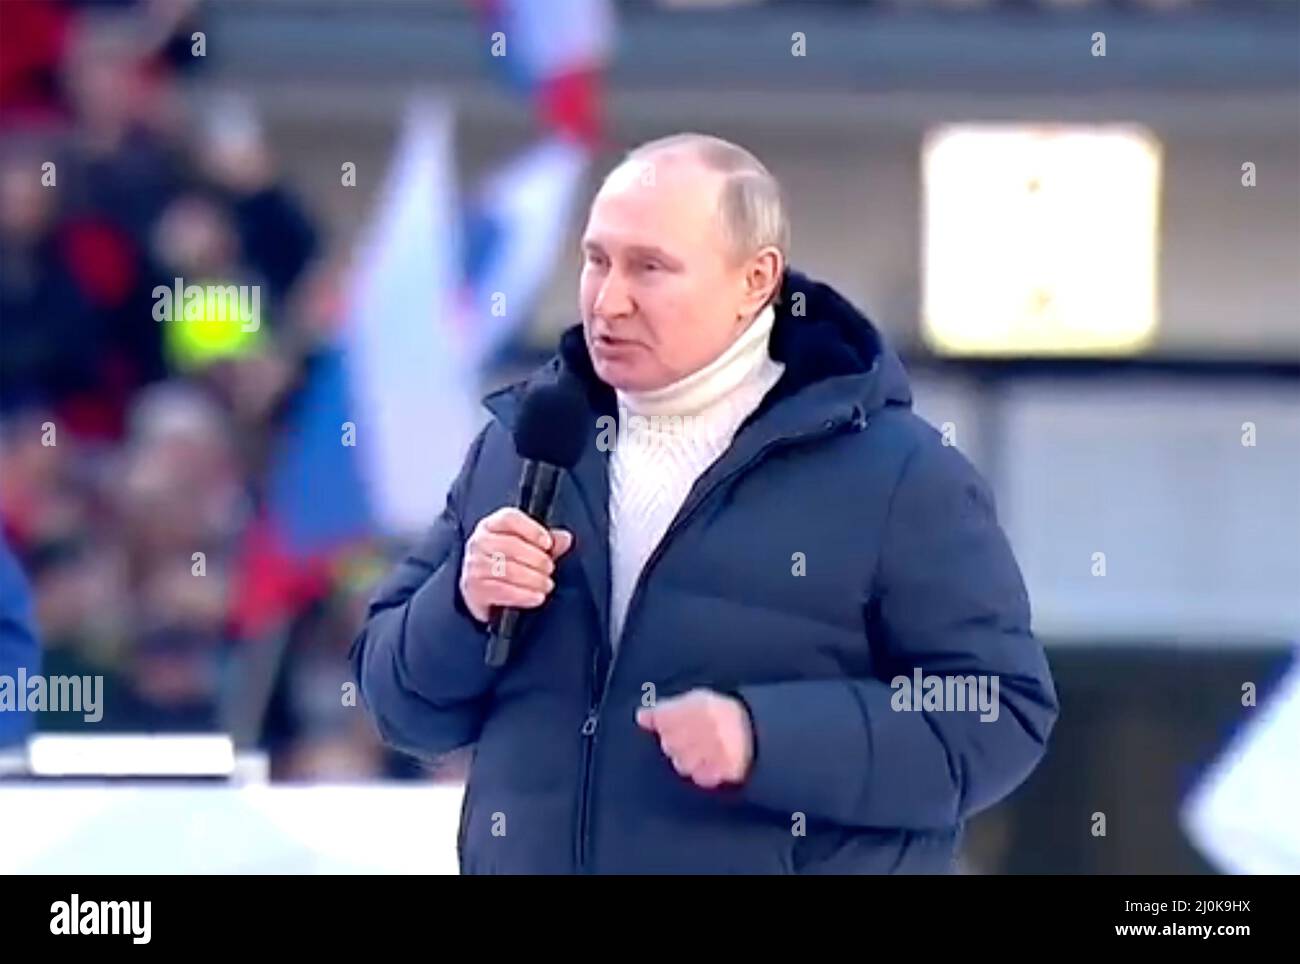 VLADIMIR PUTIN addresses a rally in Moscow on18 March 20223 to celebrate  the eighth anniversary of the annexation of Crimea. on Friday 18 March. He is wearing a white turtleneck sweater  from Italian company Kiton and a puffa jacket  by Loro Piana.Photo: Kremlin.ru Stock Photo